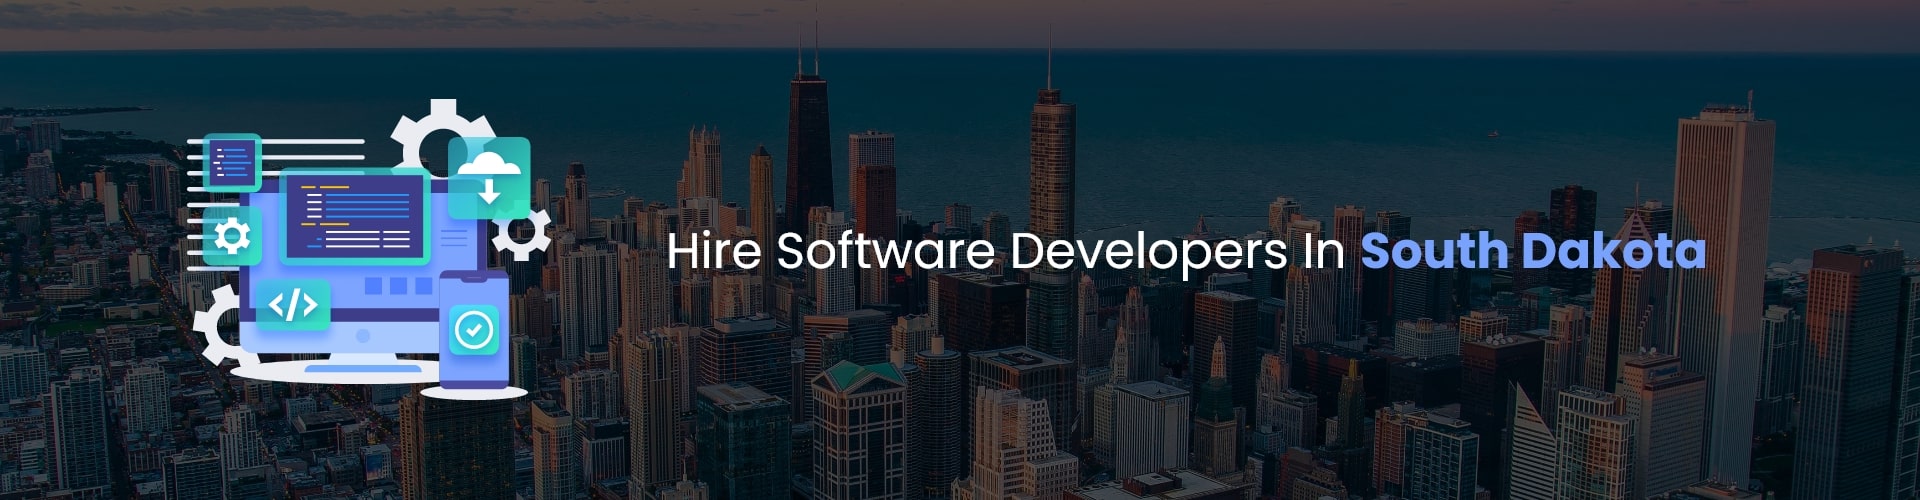 hire software developers in south dakota